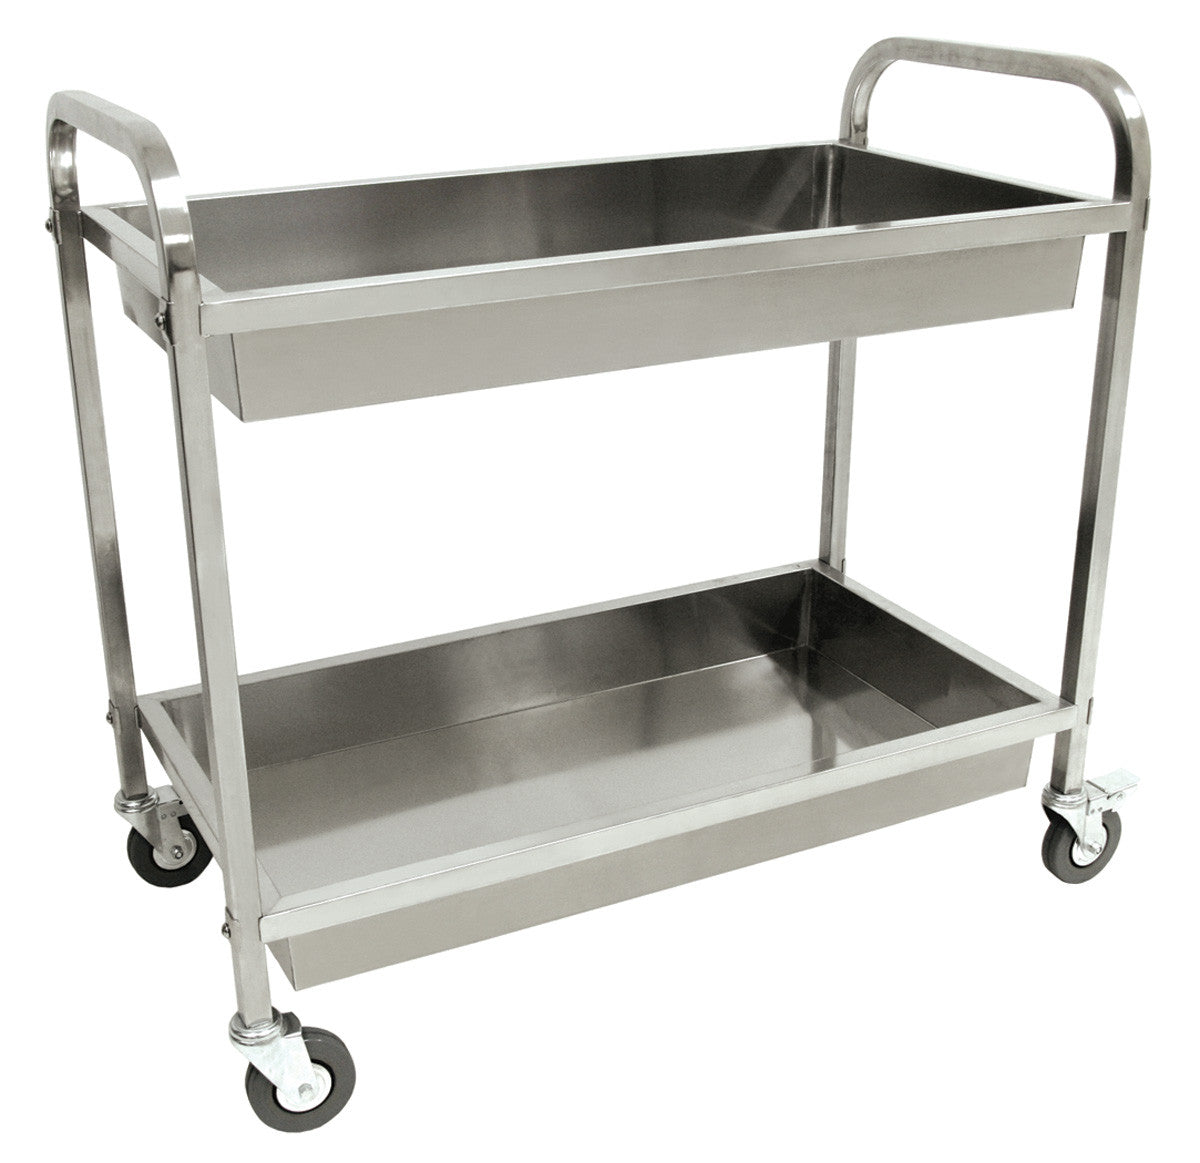 Bayou Classic Stainless Steel Serving Cart